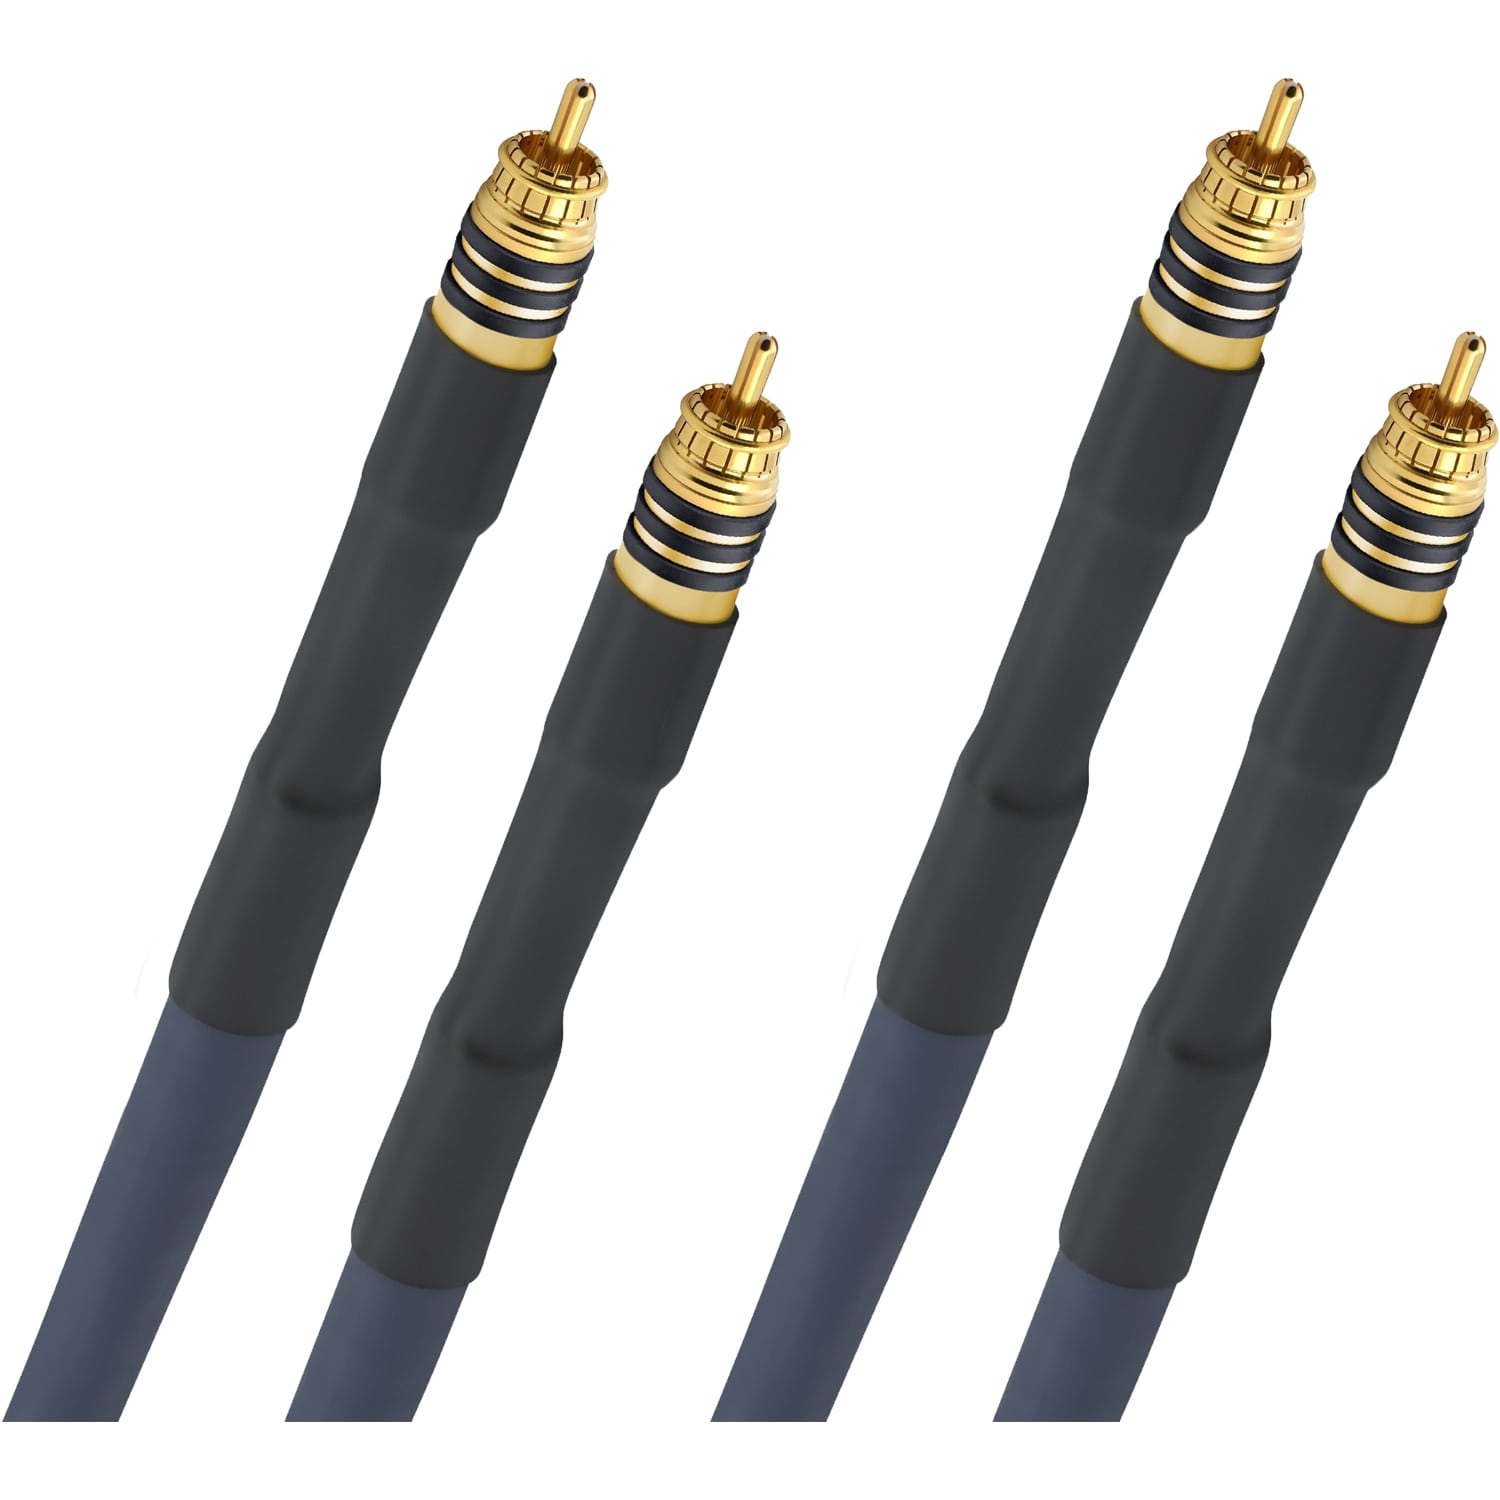 Кабели межблочные аудио Oehlbach STATE OF THE ART XXL Cable RCA, 2x2,00m, gold, D1C13116 кабели межблочные аудио oehlbach state of the art xxl cable xlr 2x2 0m gold d1c13136